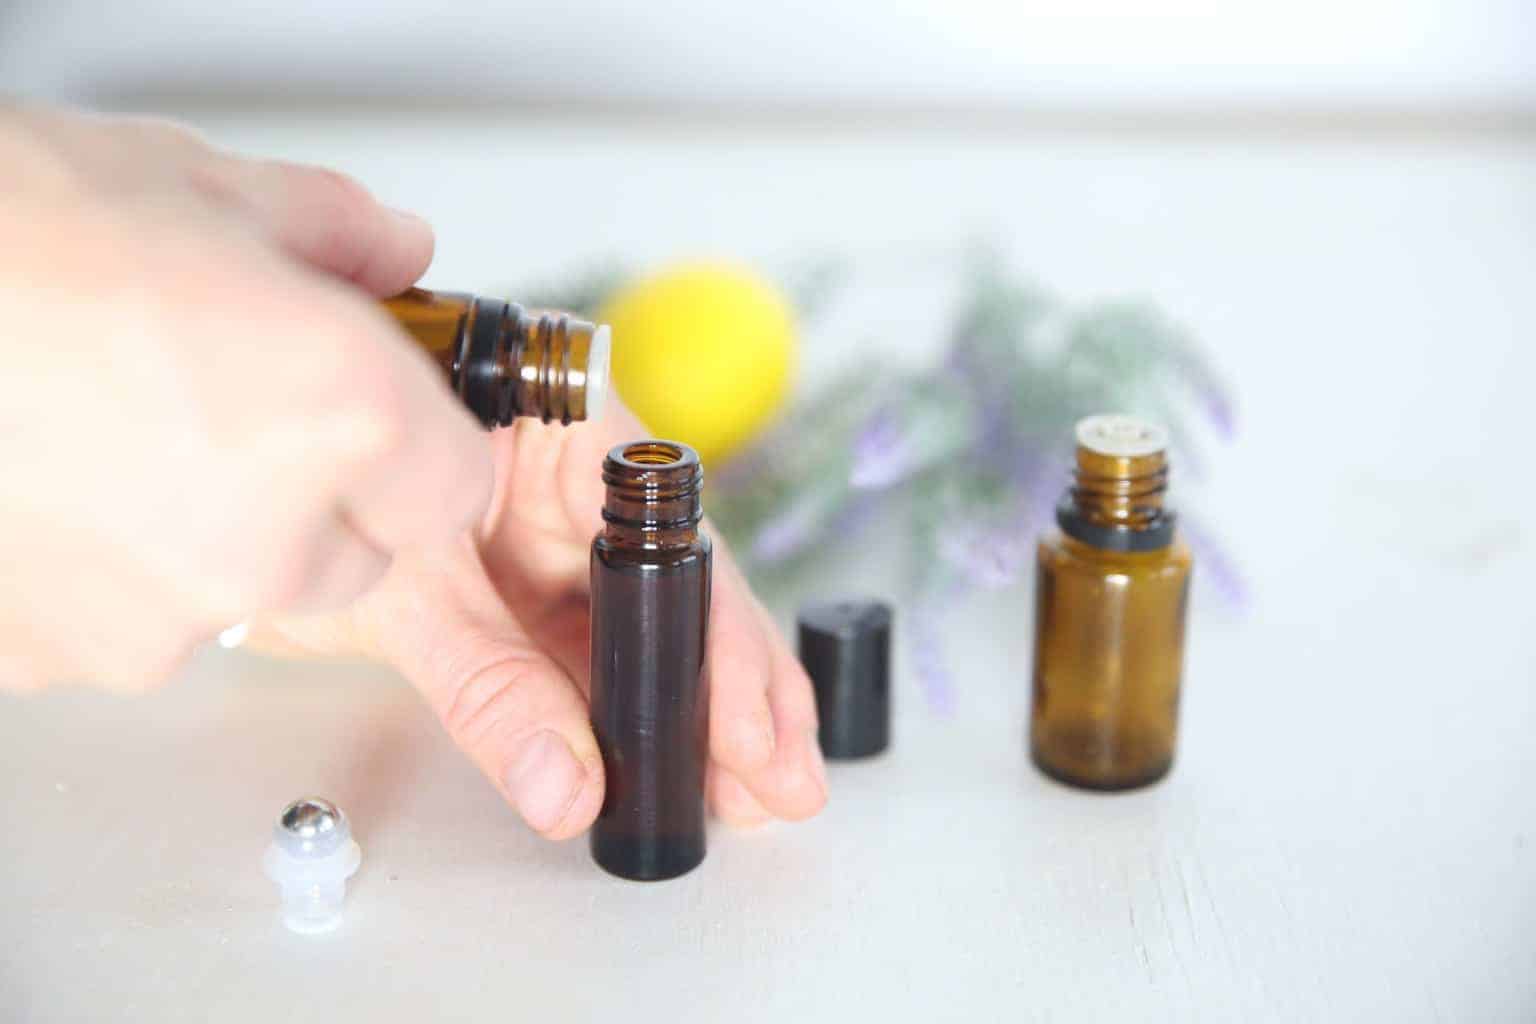 A women making seasonal allergy roller bottle with lavender and fresh lemon in the background.